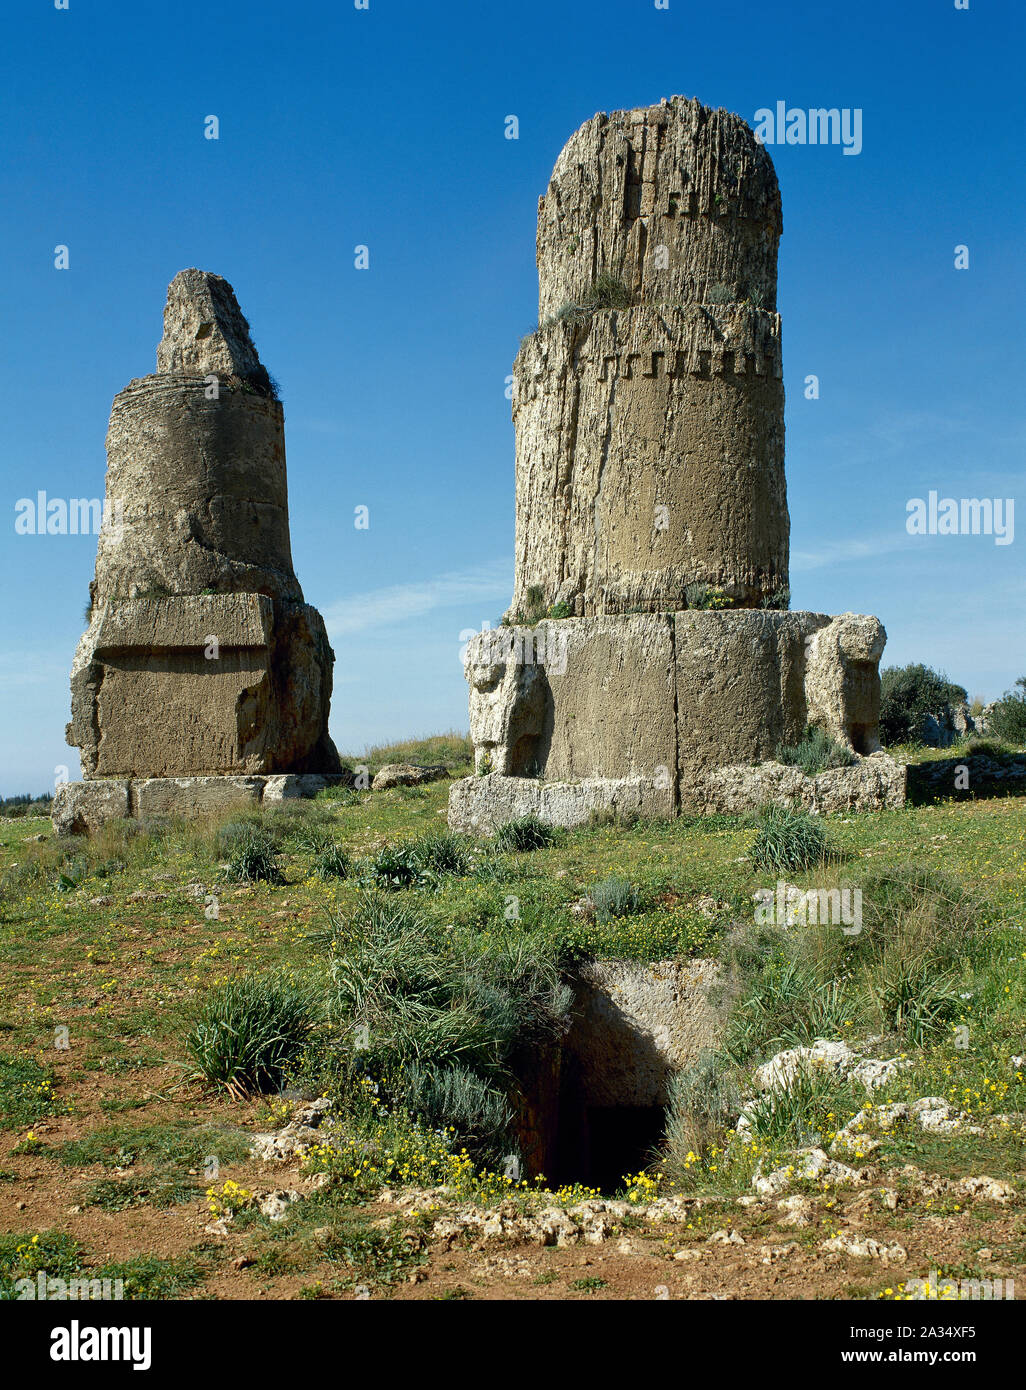 Syria. Amrit or Marathos. Ancient Phoenician city, founded in 3rd millennium BC. Burial towers called 'al Maghazil' or The Spindles. (Photo taken before the Syrian Civil War). Stock Photo